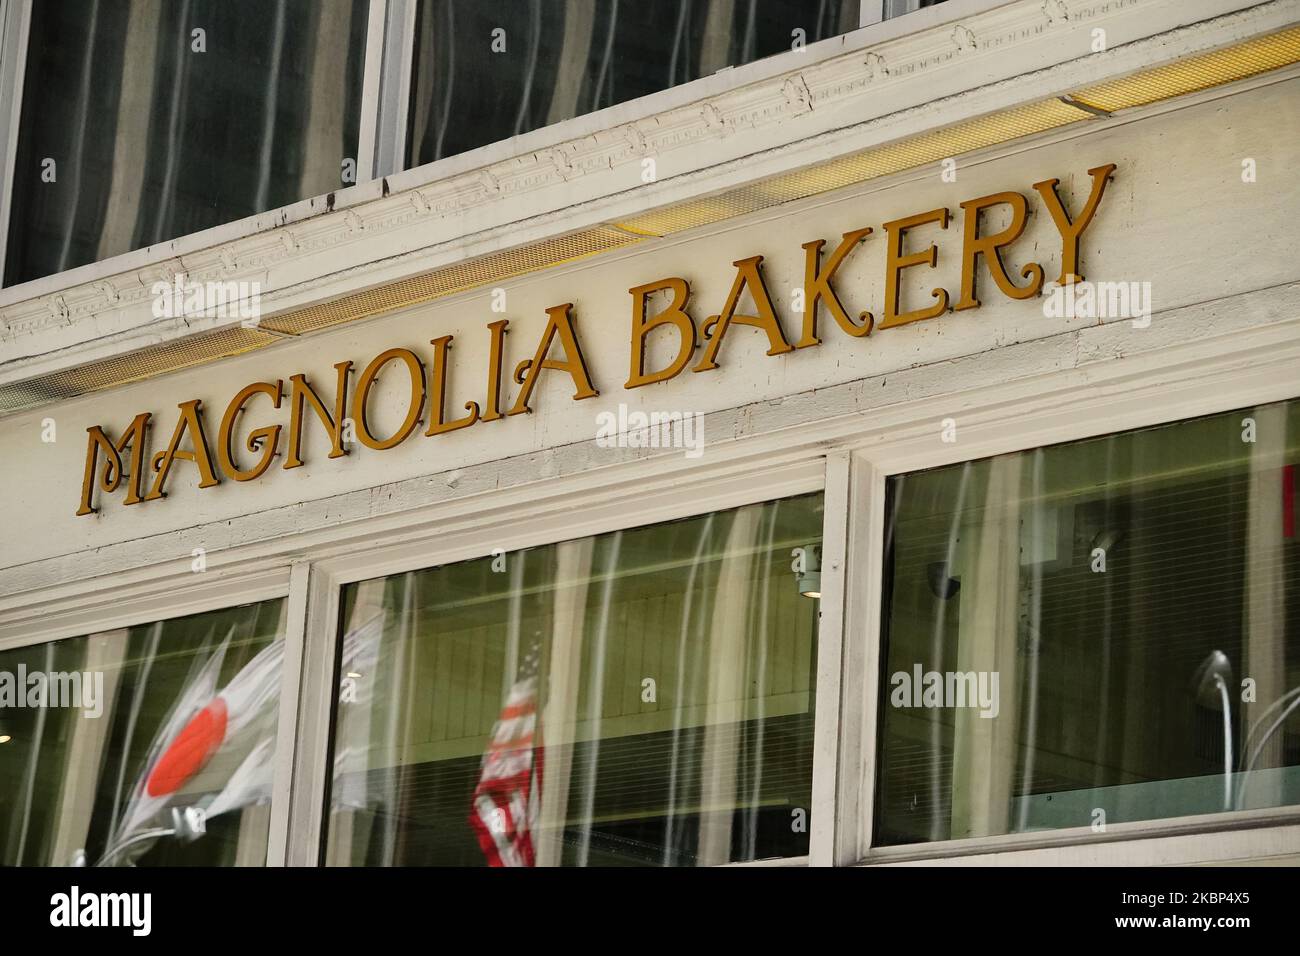 A view of Magnolia Bakery during the coronavirus pandemic on May 20, 2020 in Lincoln Center, New York City. COVID-19 has spread to most countries around the world, claiming over 316,000 lives with over 4.8 million infections reported. (Photo by John Nacion/NurPhoto) Stock Photo